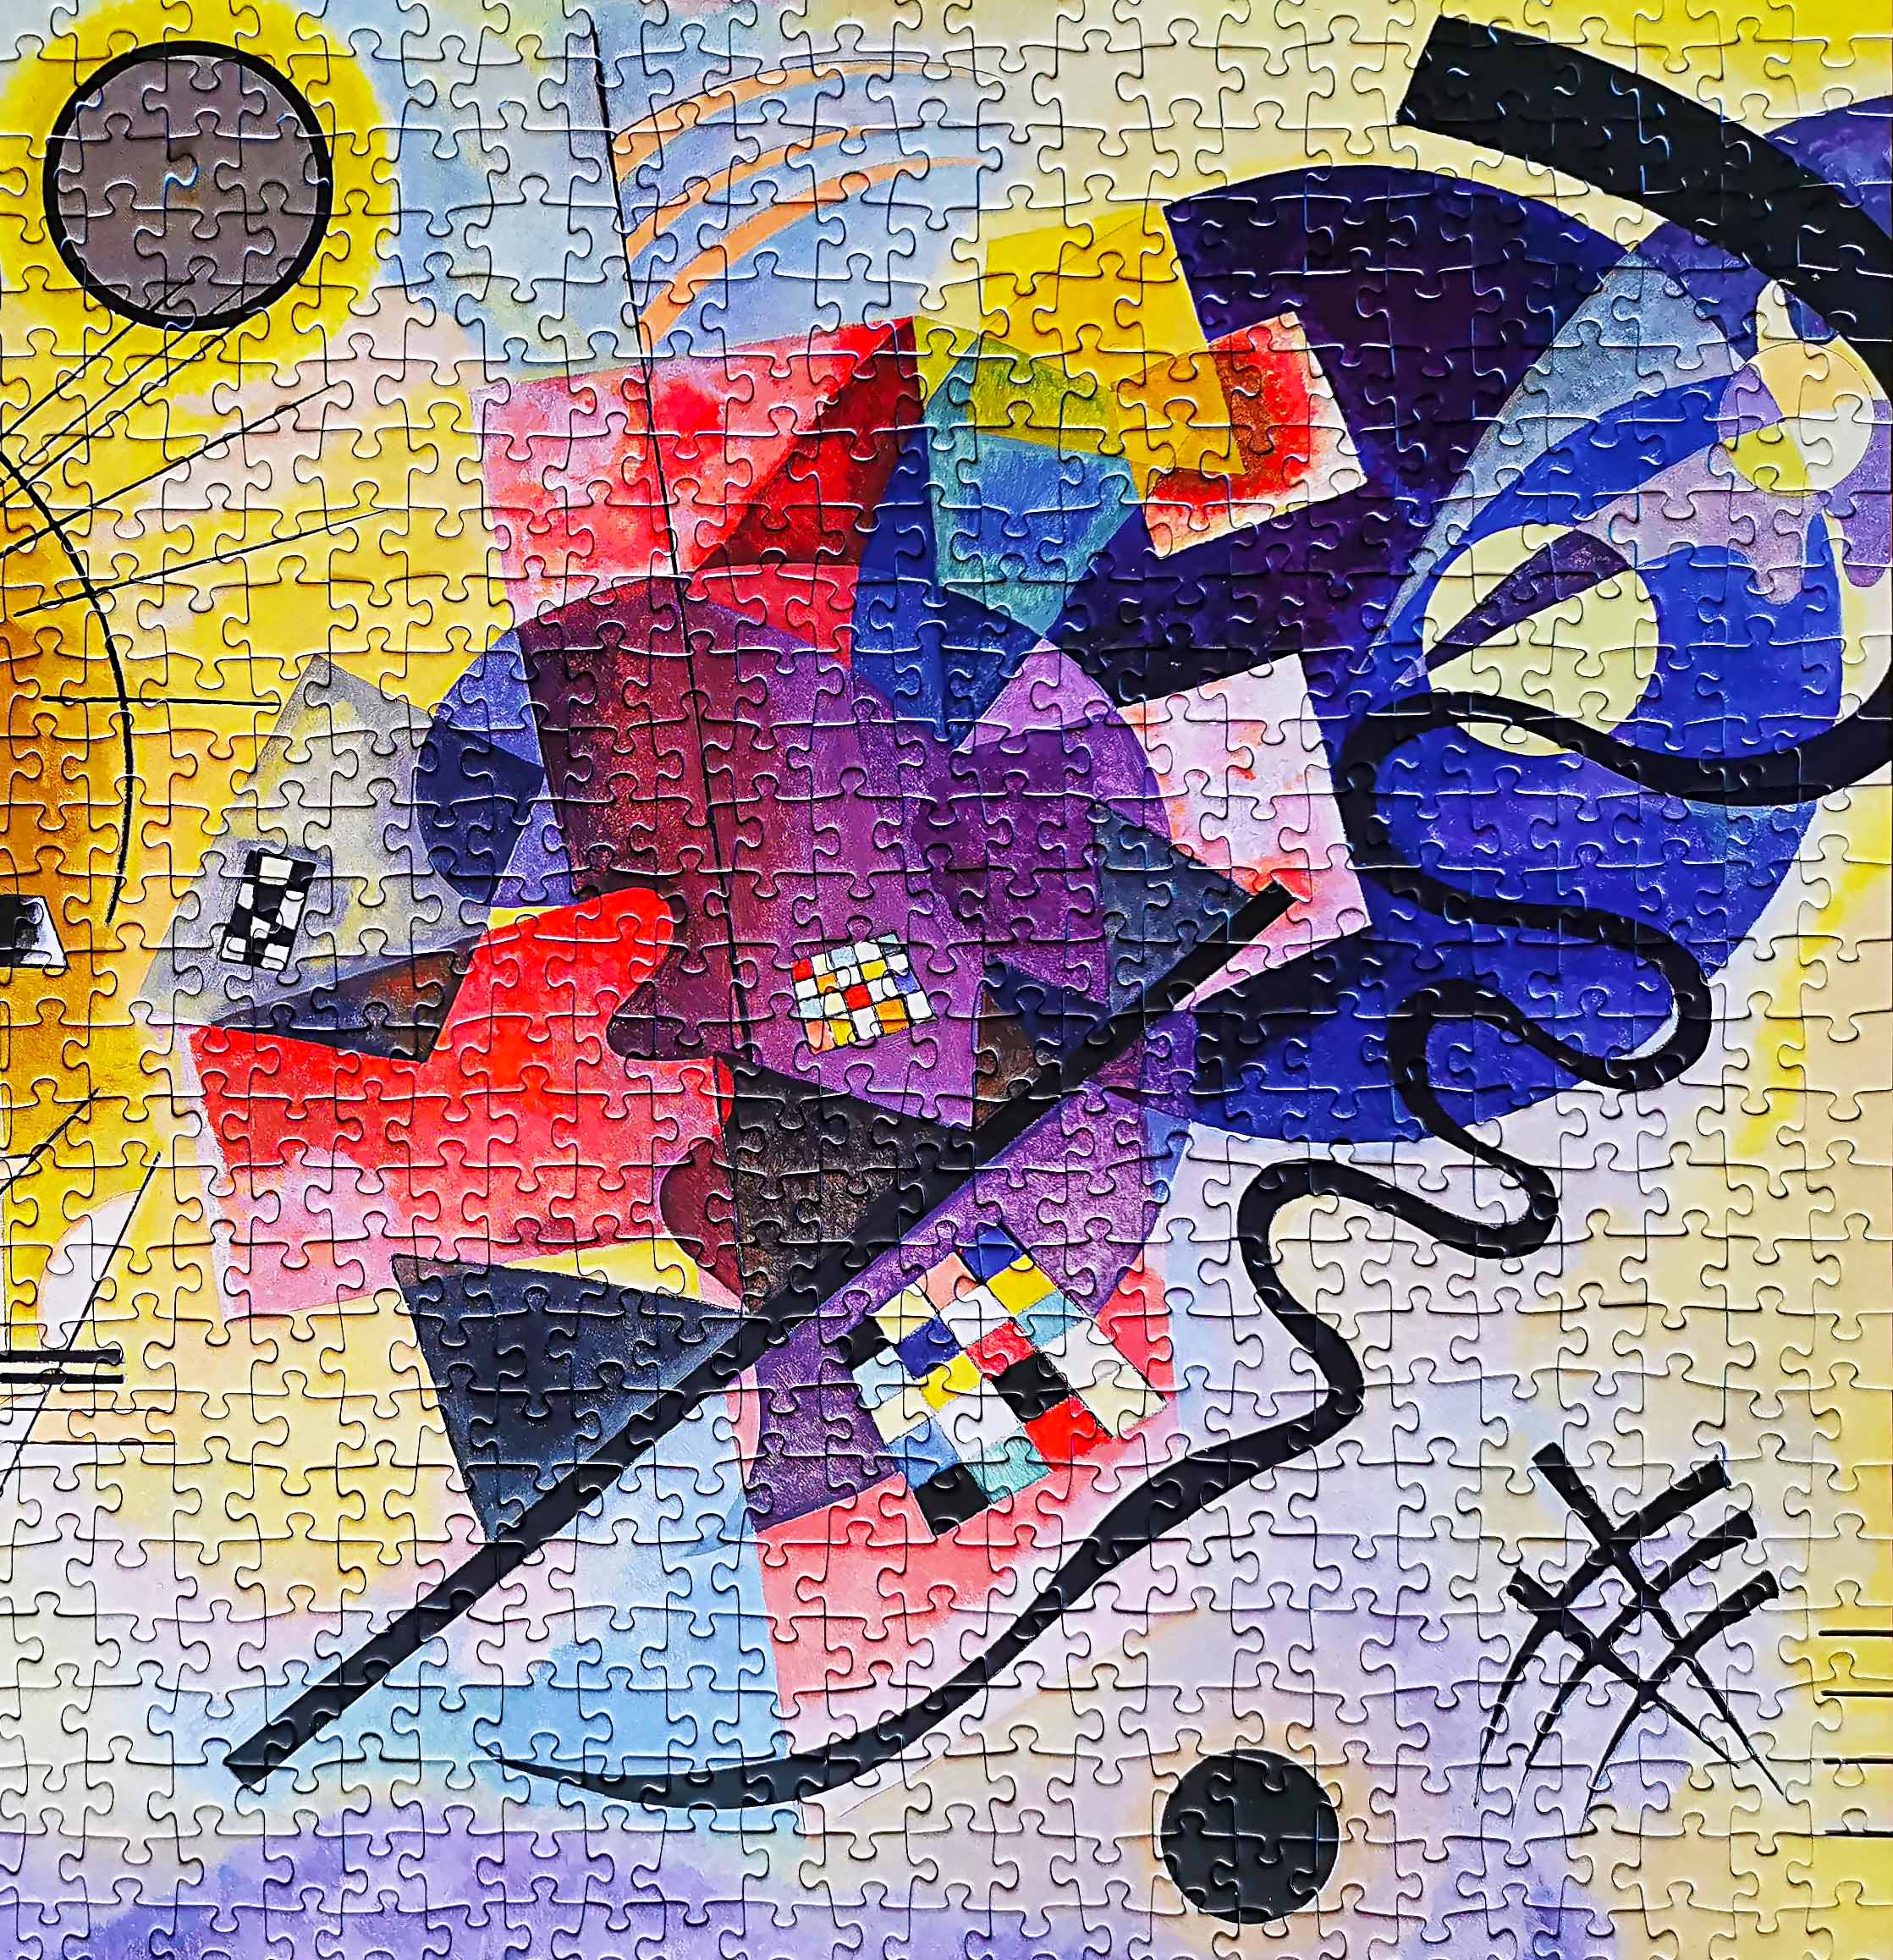 Beautifully designed Wassily Kandinsky Yellow-Red-Blue Jigsaw Puzzle for art lovers